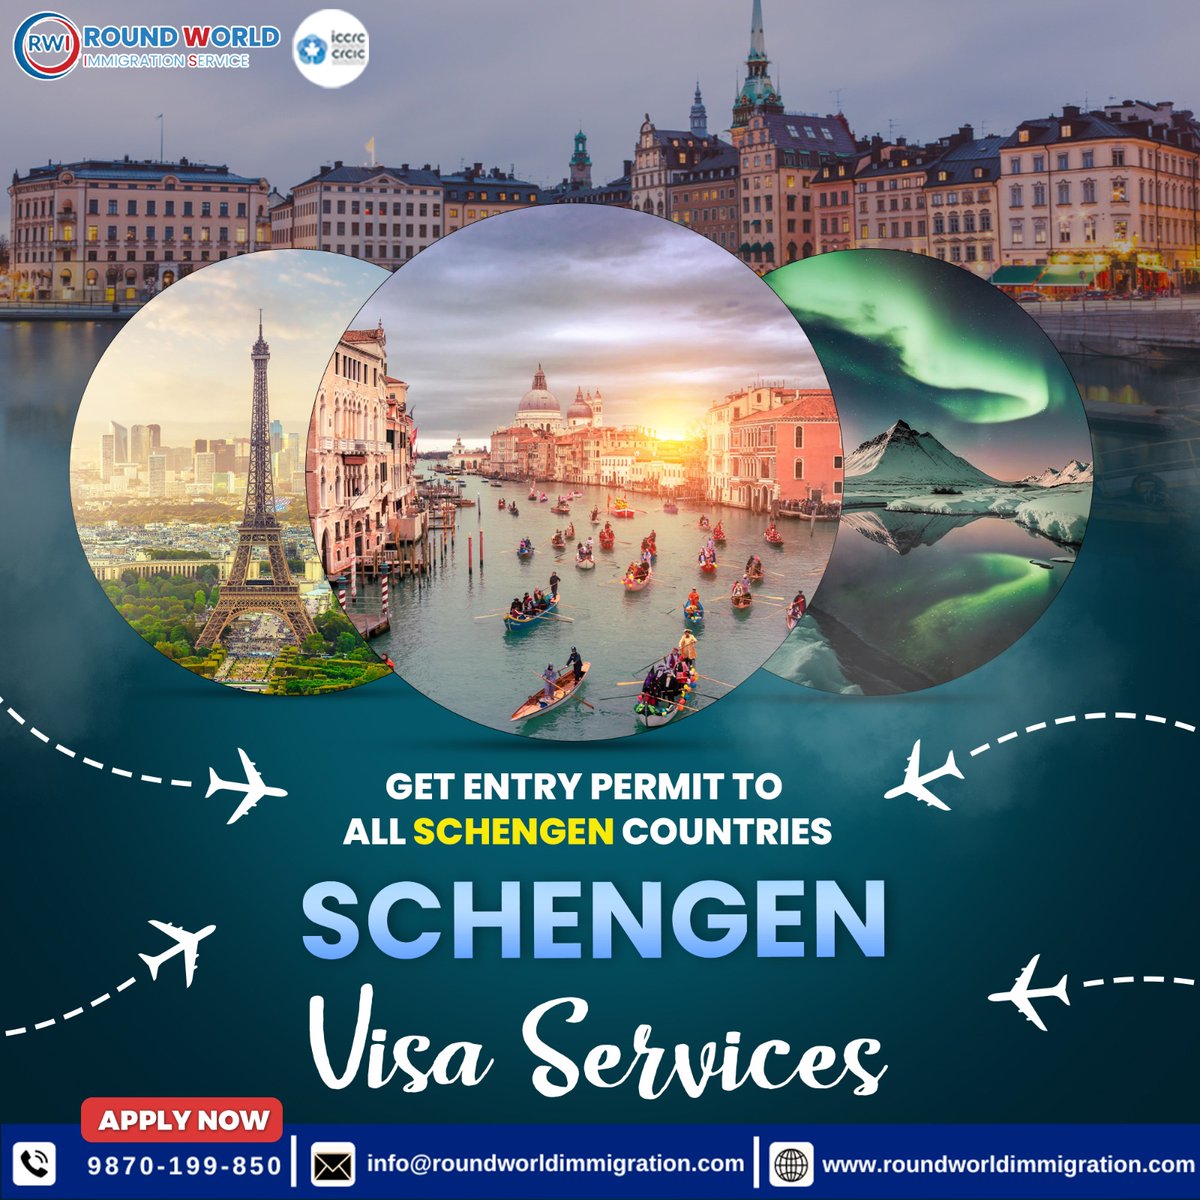 Unleash Your European Adventure: Explore with a Schengen Visa!

Call Now - 098701 99850📲
Email At - info@roundworldimmigration.com 👈
Visit Our Website - bit.ly/47hRKBf 

#SchengenVisa #EuropeTravel  #GetYourSchengenVisa #roundworldimmigrationservice #workpermit